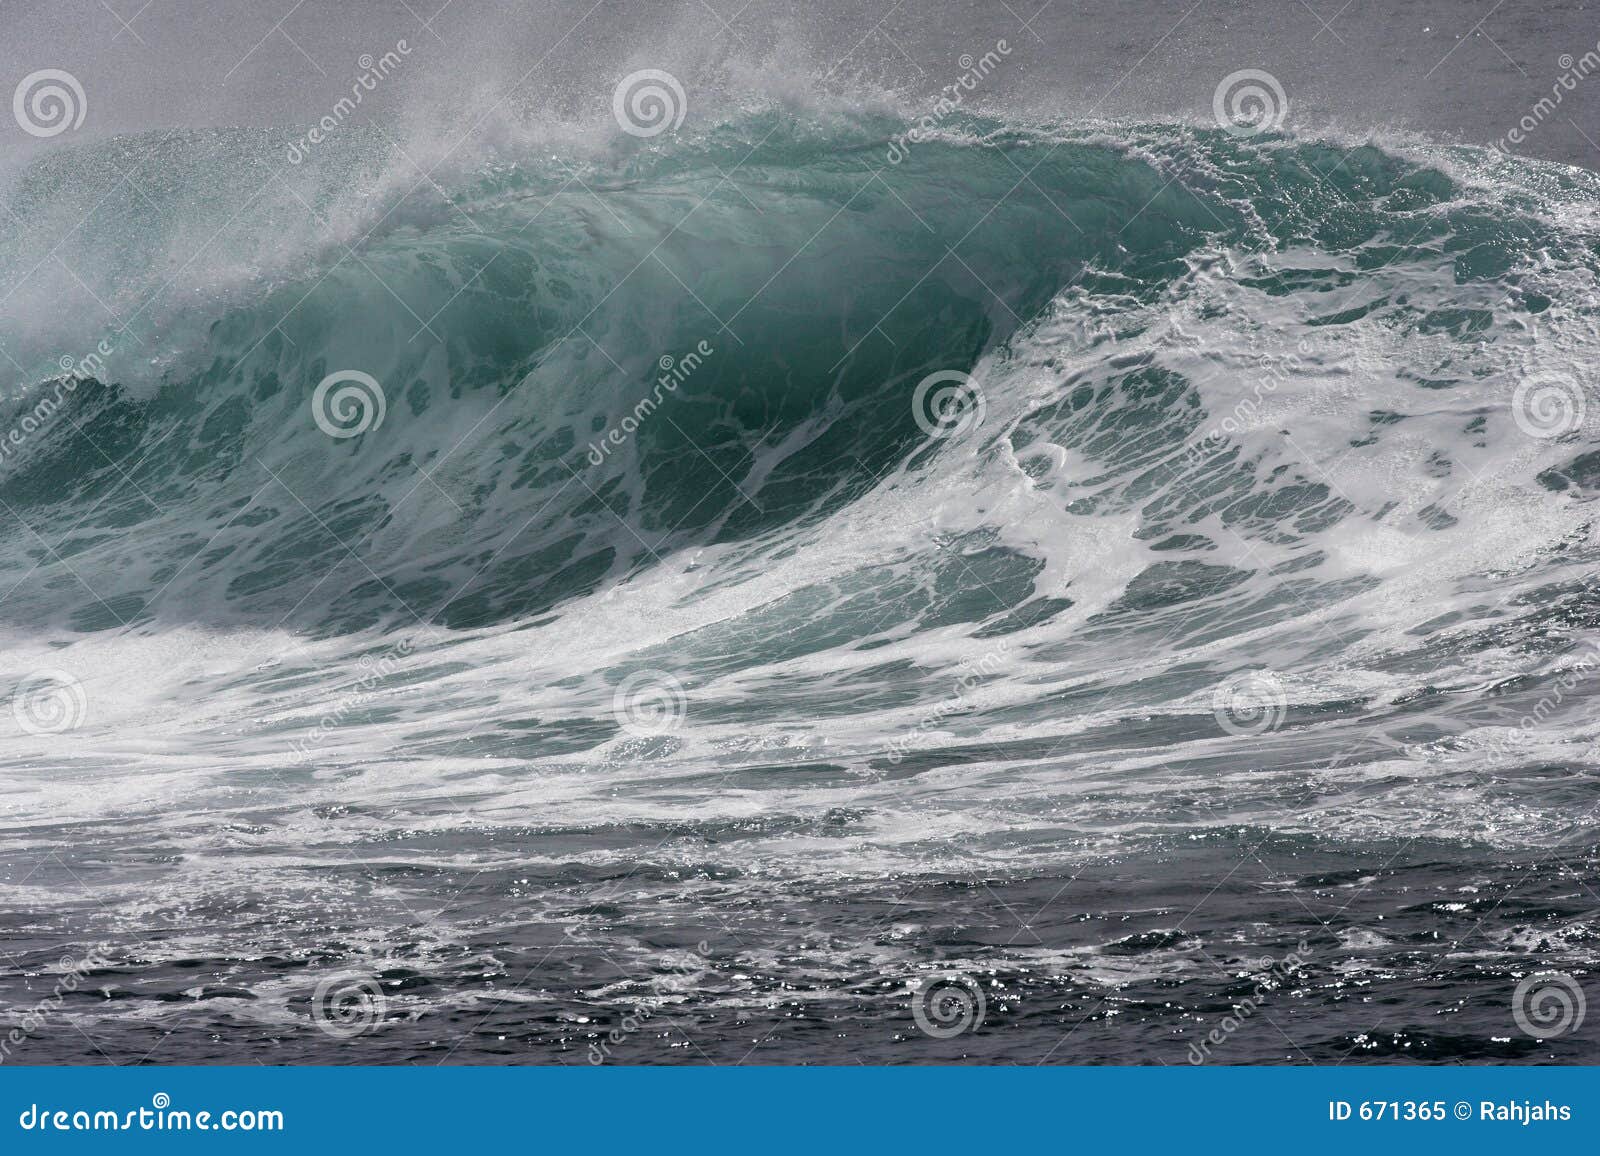 frothy wave